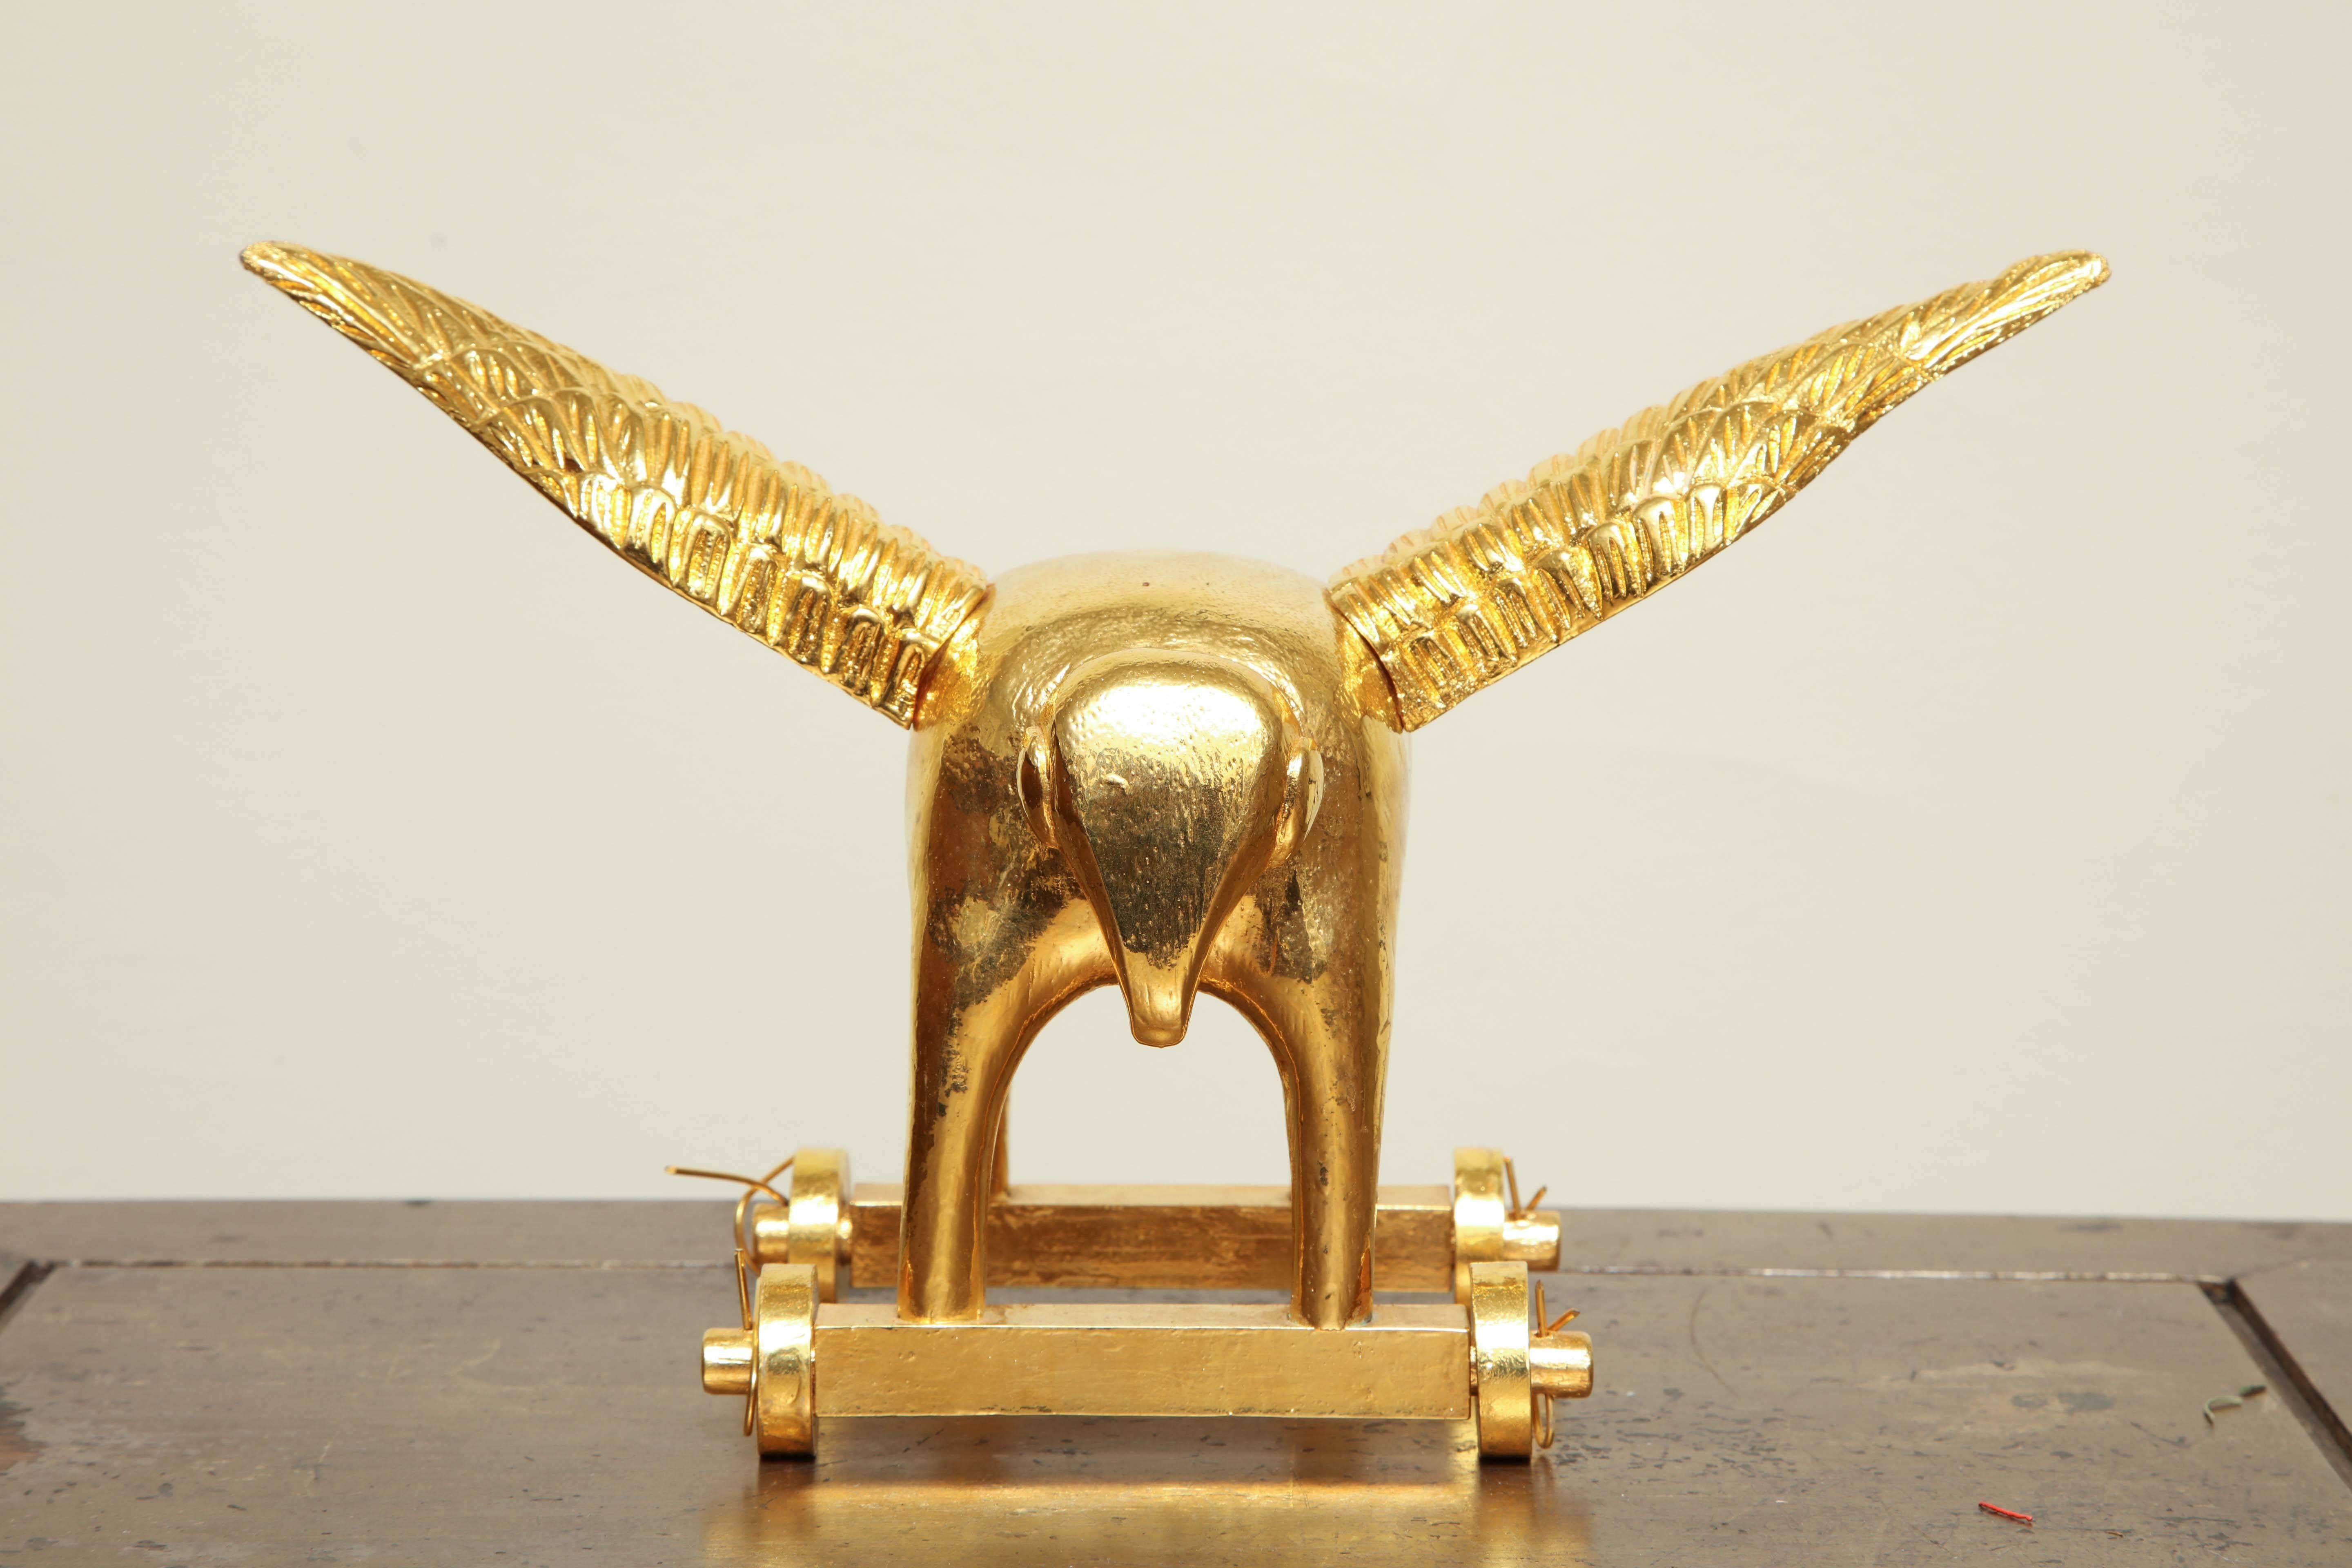 Hand-carved elephant plated in 24-karat gold, with removable magnetic wings by American artist Matt Austin.